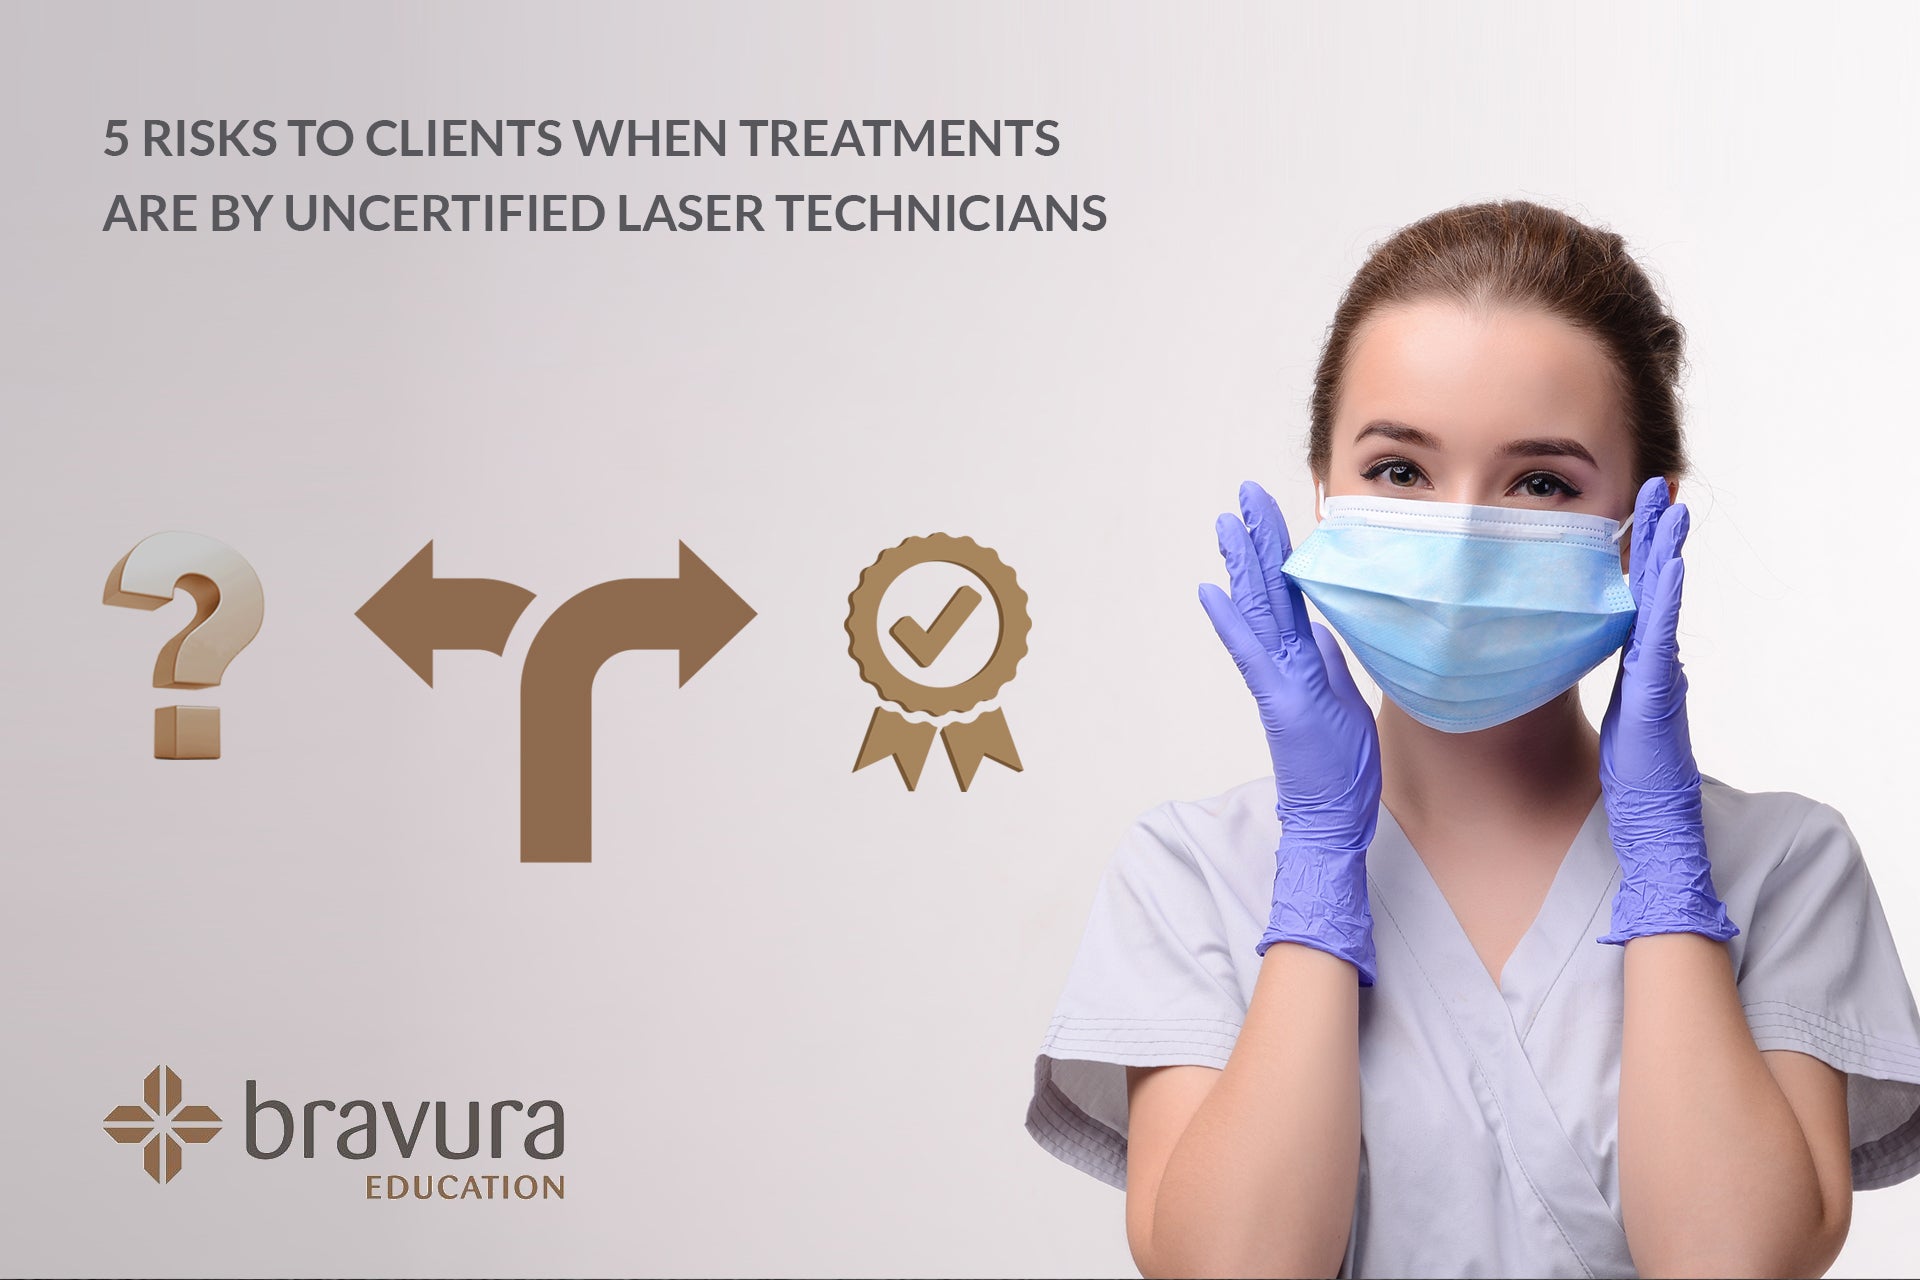 5 Risks to Clients When Treatments are by Uncertified Laser Technician